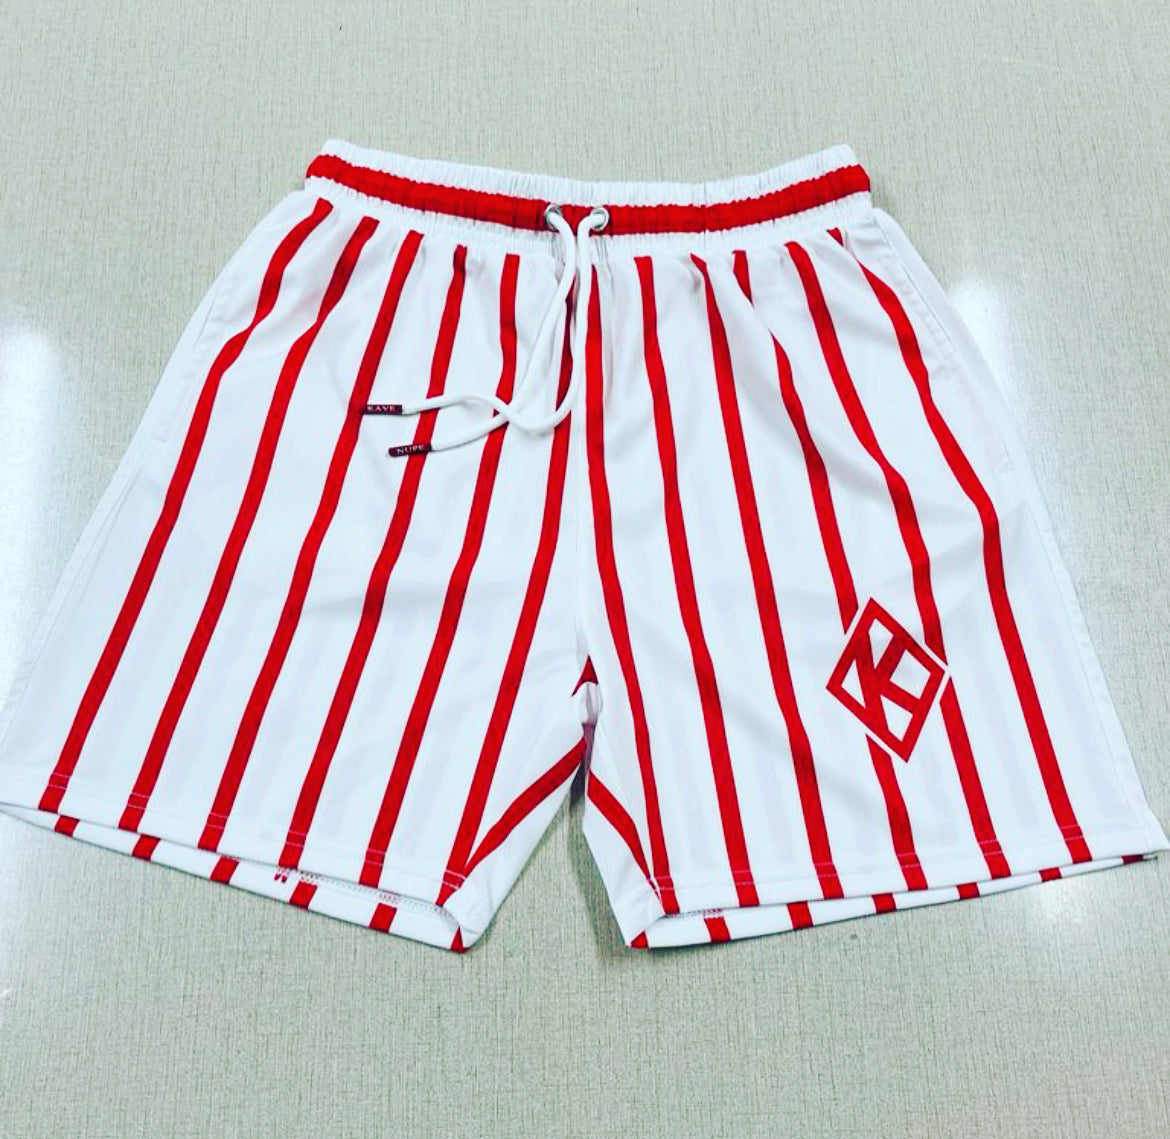 Made with high-quality materials, these shorts are durable and built to last. With features like a drawstring waist and convenient pockets, they are both functional and stylish. Whether you're lounging by the pool or playing beach volleyball, these Kappa Alpha Psi shorts are sure to make a statement.